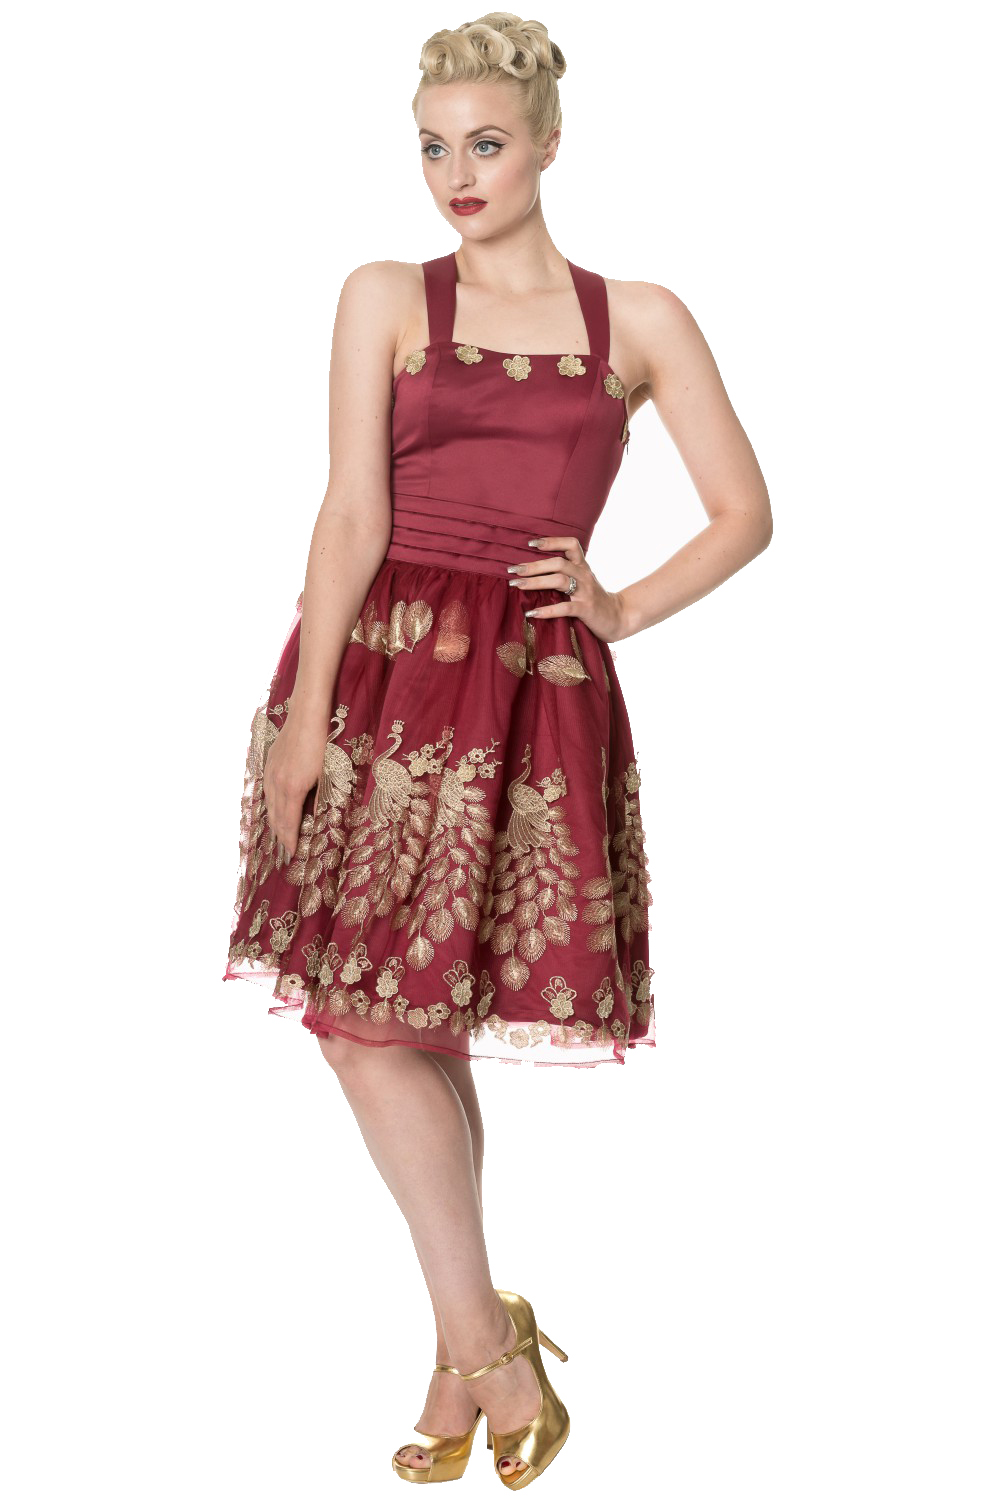 Dancing Days Moonlight Escape Burgundy Prom Dress | Dancing Days By Banned